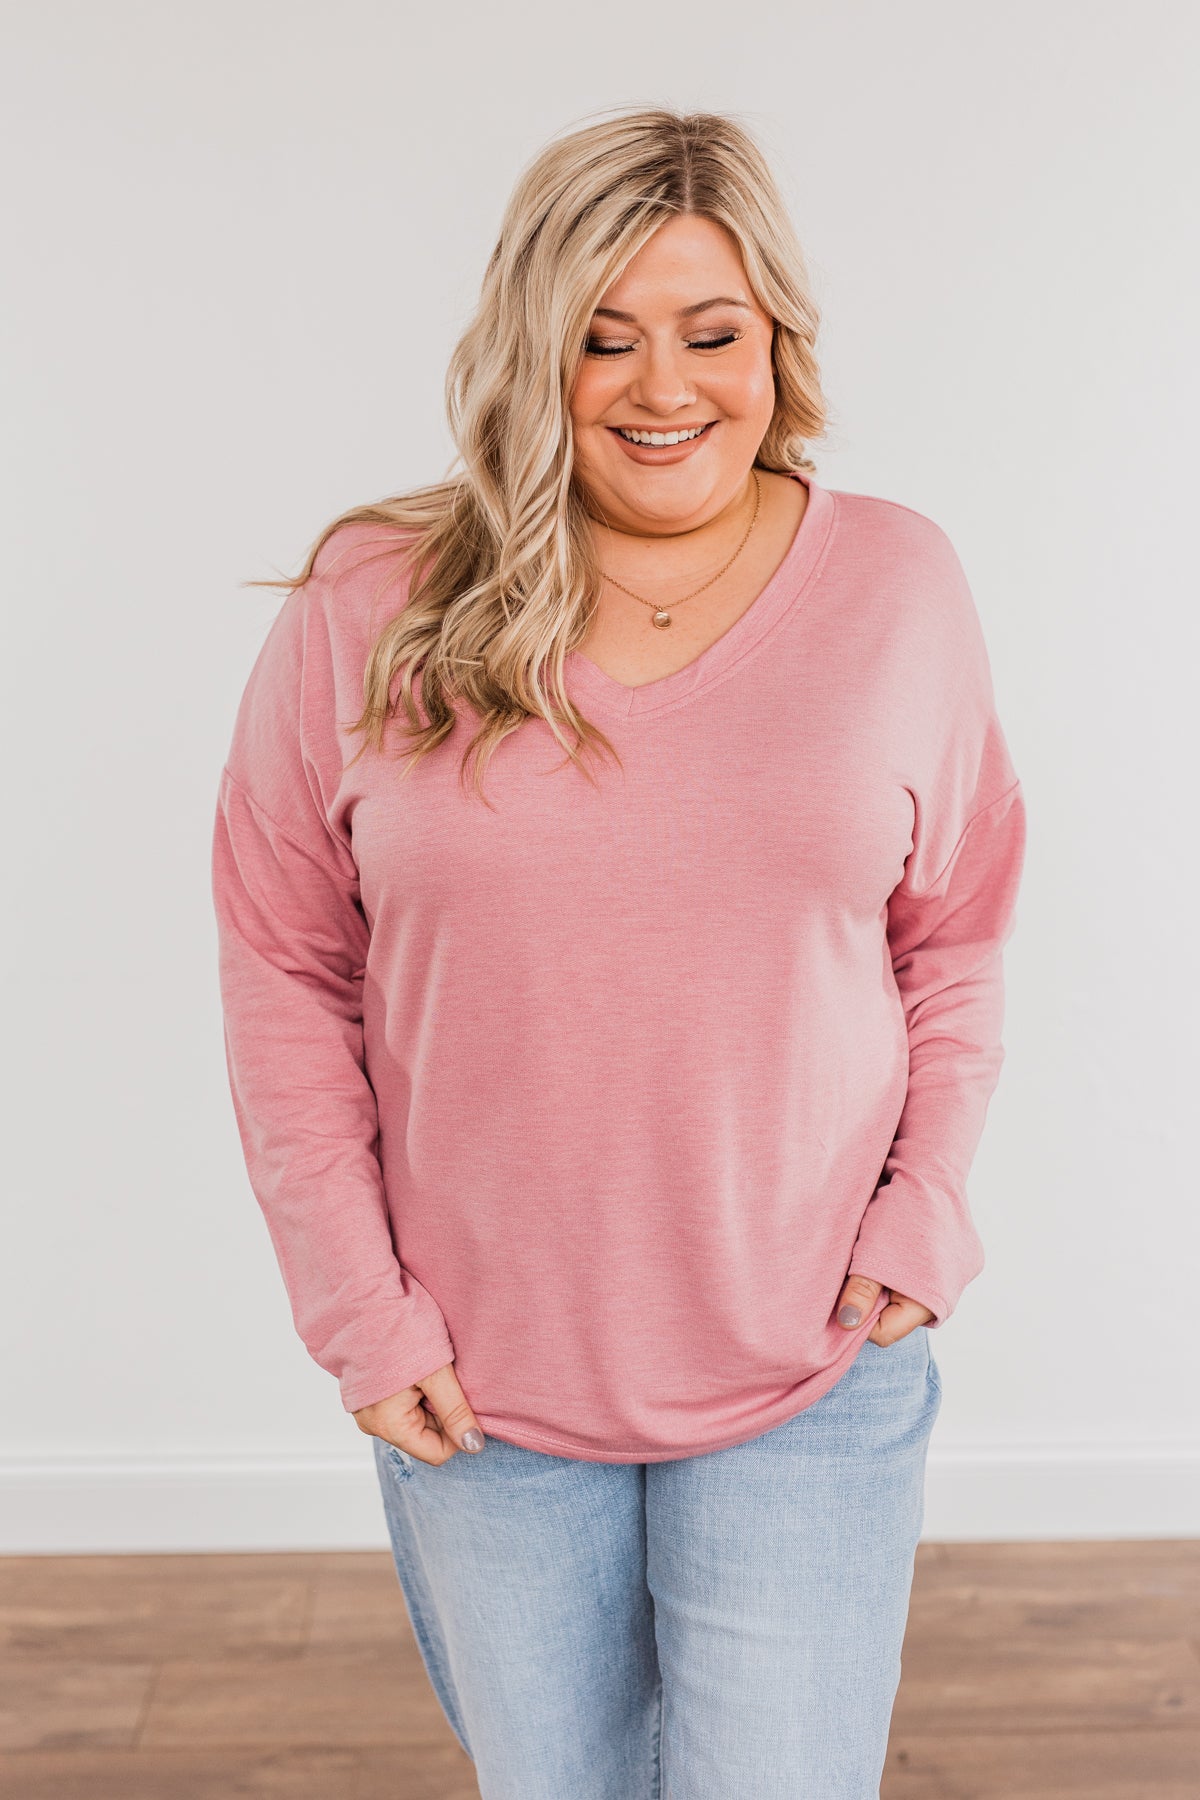 Where Is The Love Long Sleeve Top- Mauve